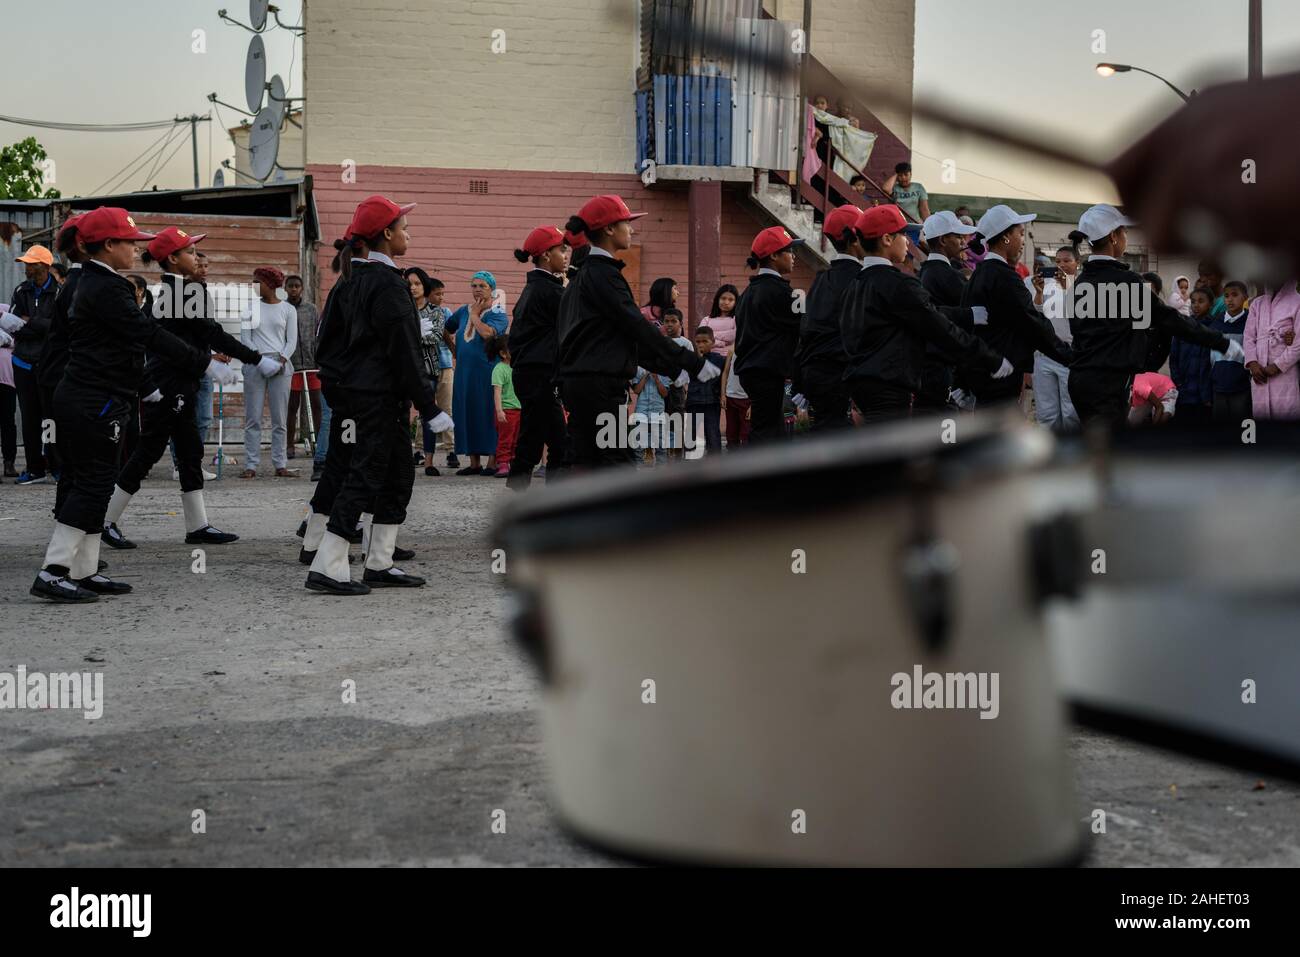 Marching bands in the gang and drug infested South African Cape Town suburb of Hanover Park going through their paces Stock Photo